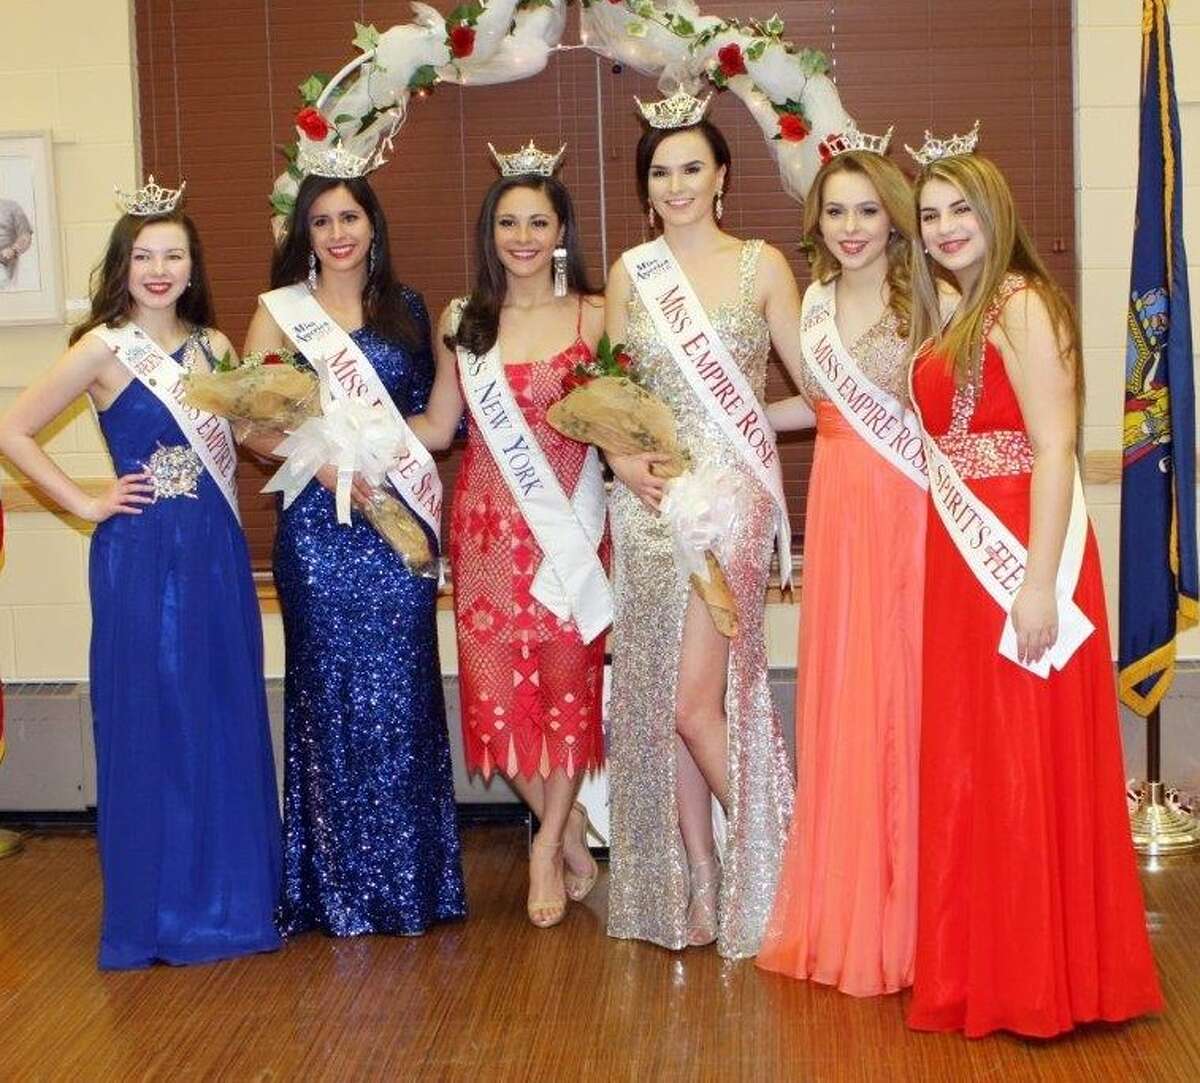 These are the results of a local pageant connected with the Miss America organization, held in Clifton Park on March 5. From left are Miss Empire Star's Outstanding Teen: Katie Manuel; Miss Empire Star Emily Drooby from Guilderland; Miss New York Jamie Macchia; Miss Empire Rose Amanda Abdagic from Utica; Miss Empire Rose's Outstanding Teen Haley Curtiss; Miss Empire Spirit Outstanding Teen Dominique Bianco. The pageant director is Janet Murphy